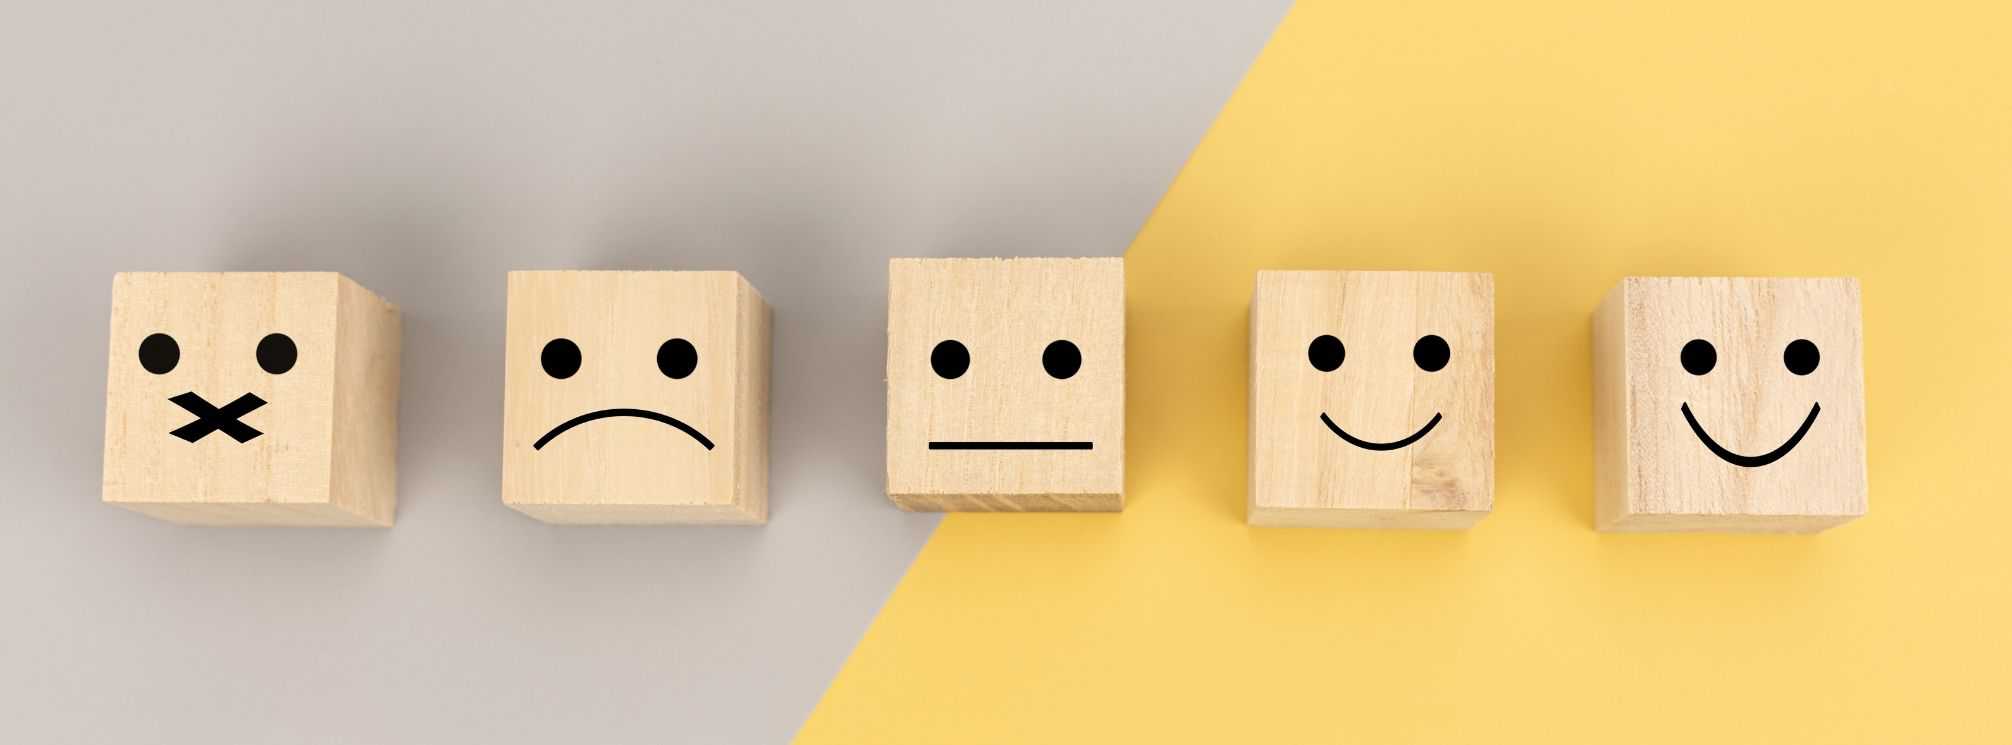 employee engagement likert scale with smiley faces